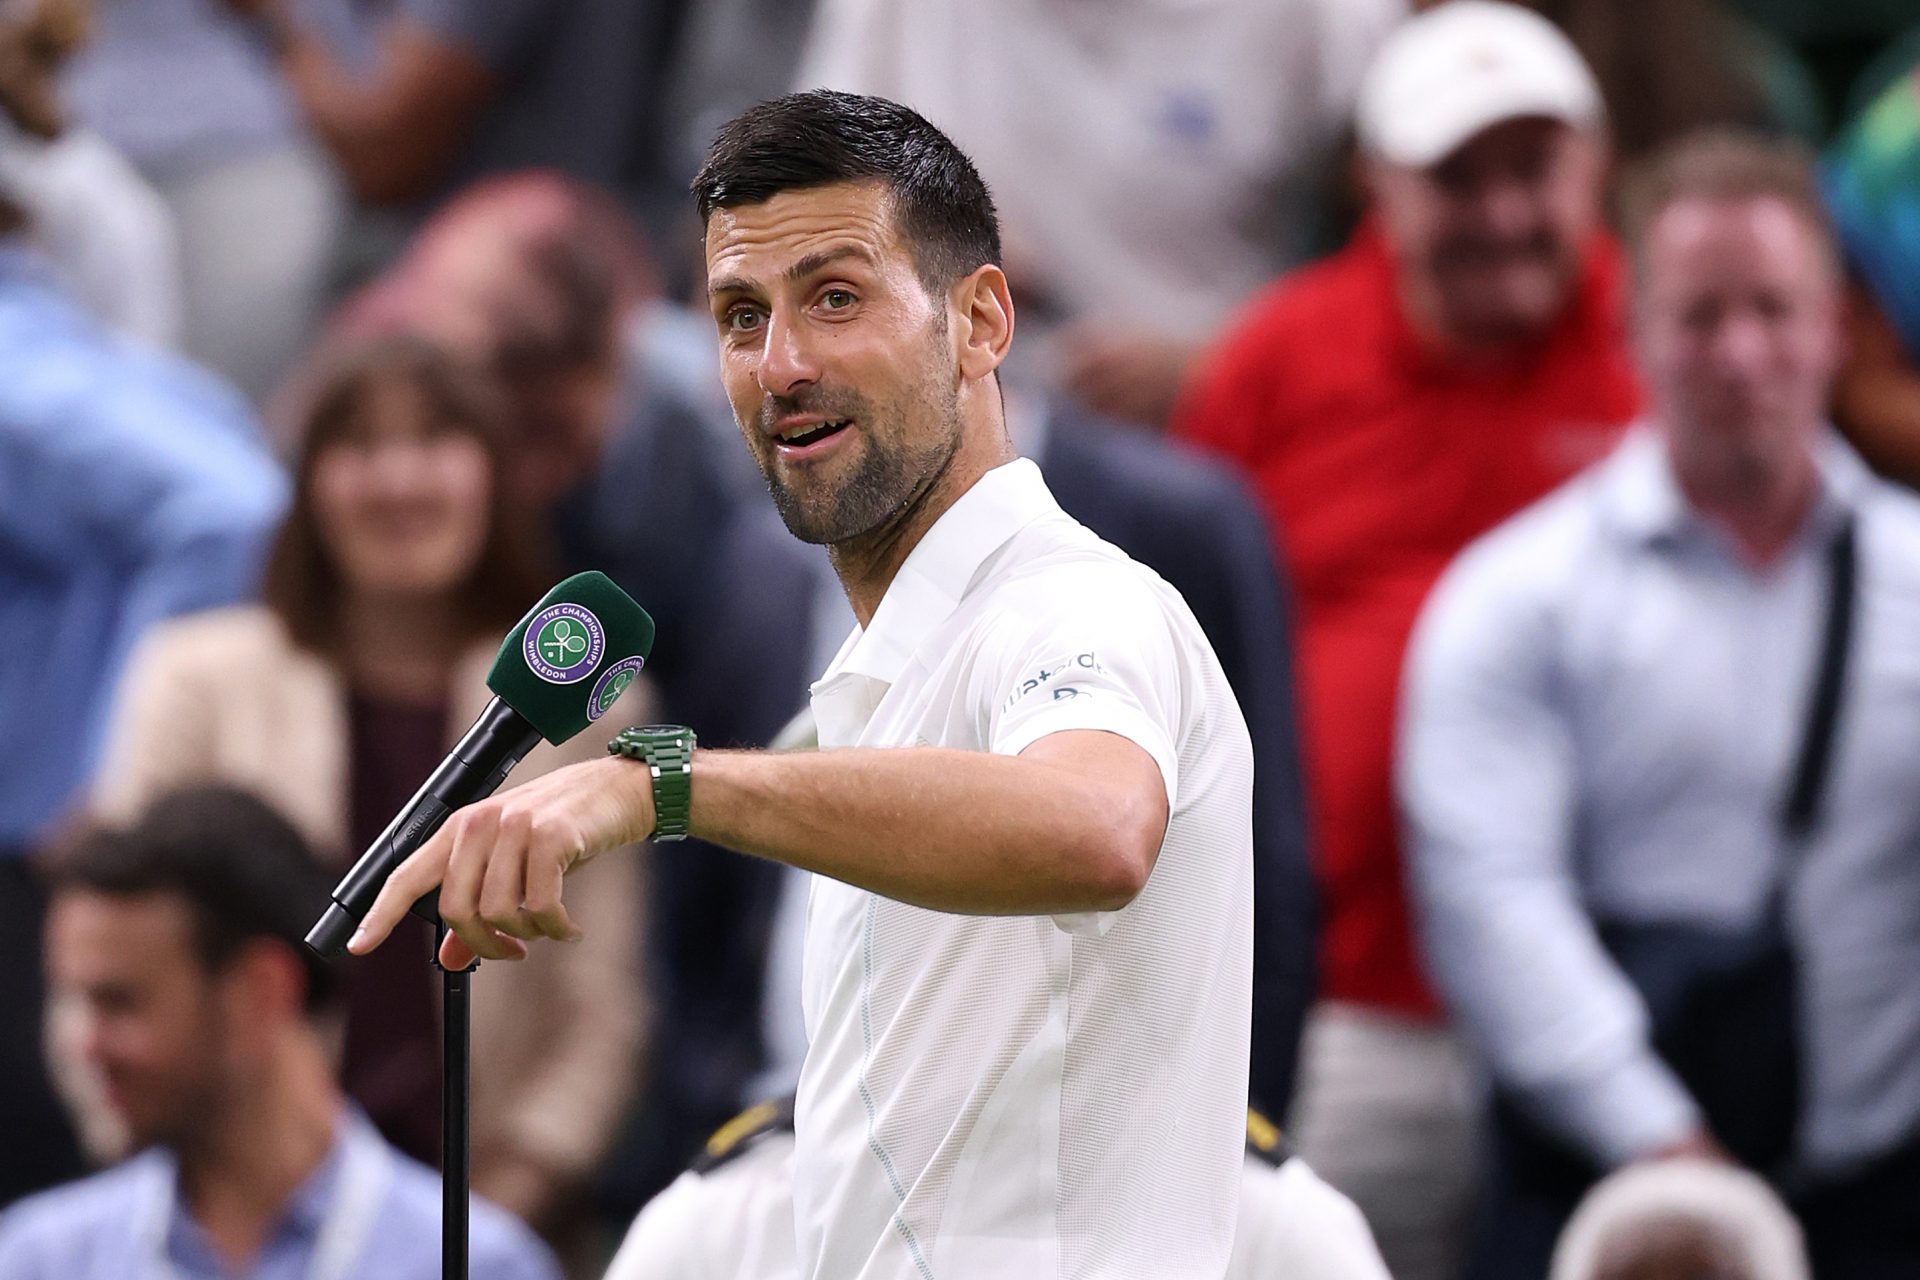 'I know all the tricks': Novak Djokovic lashes out at Wimbledon crowd